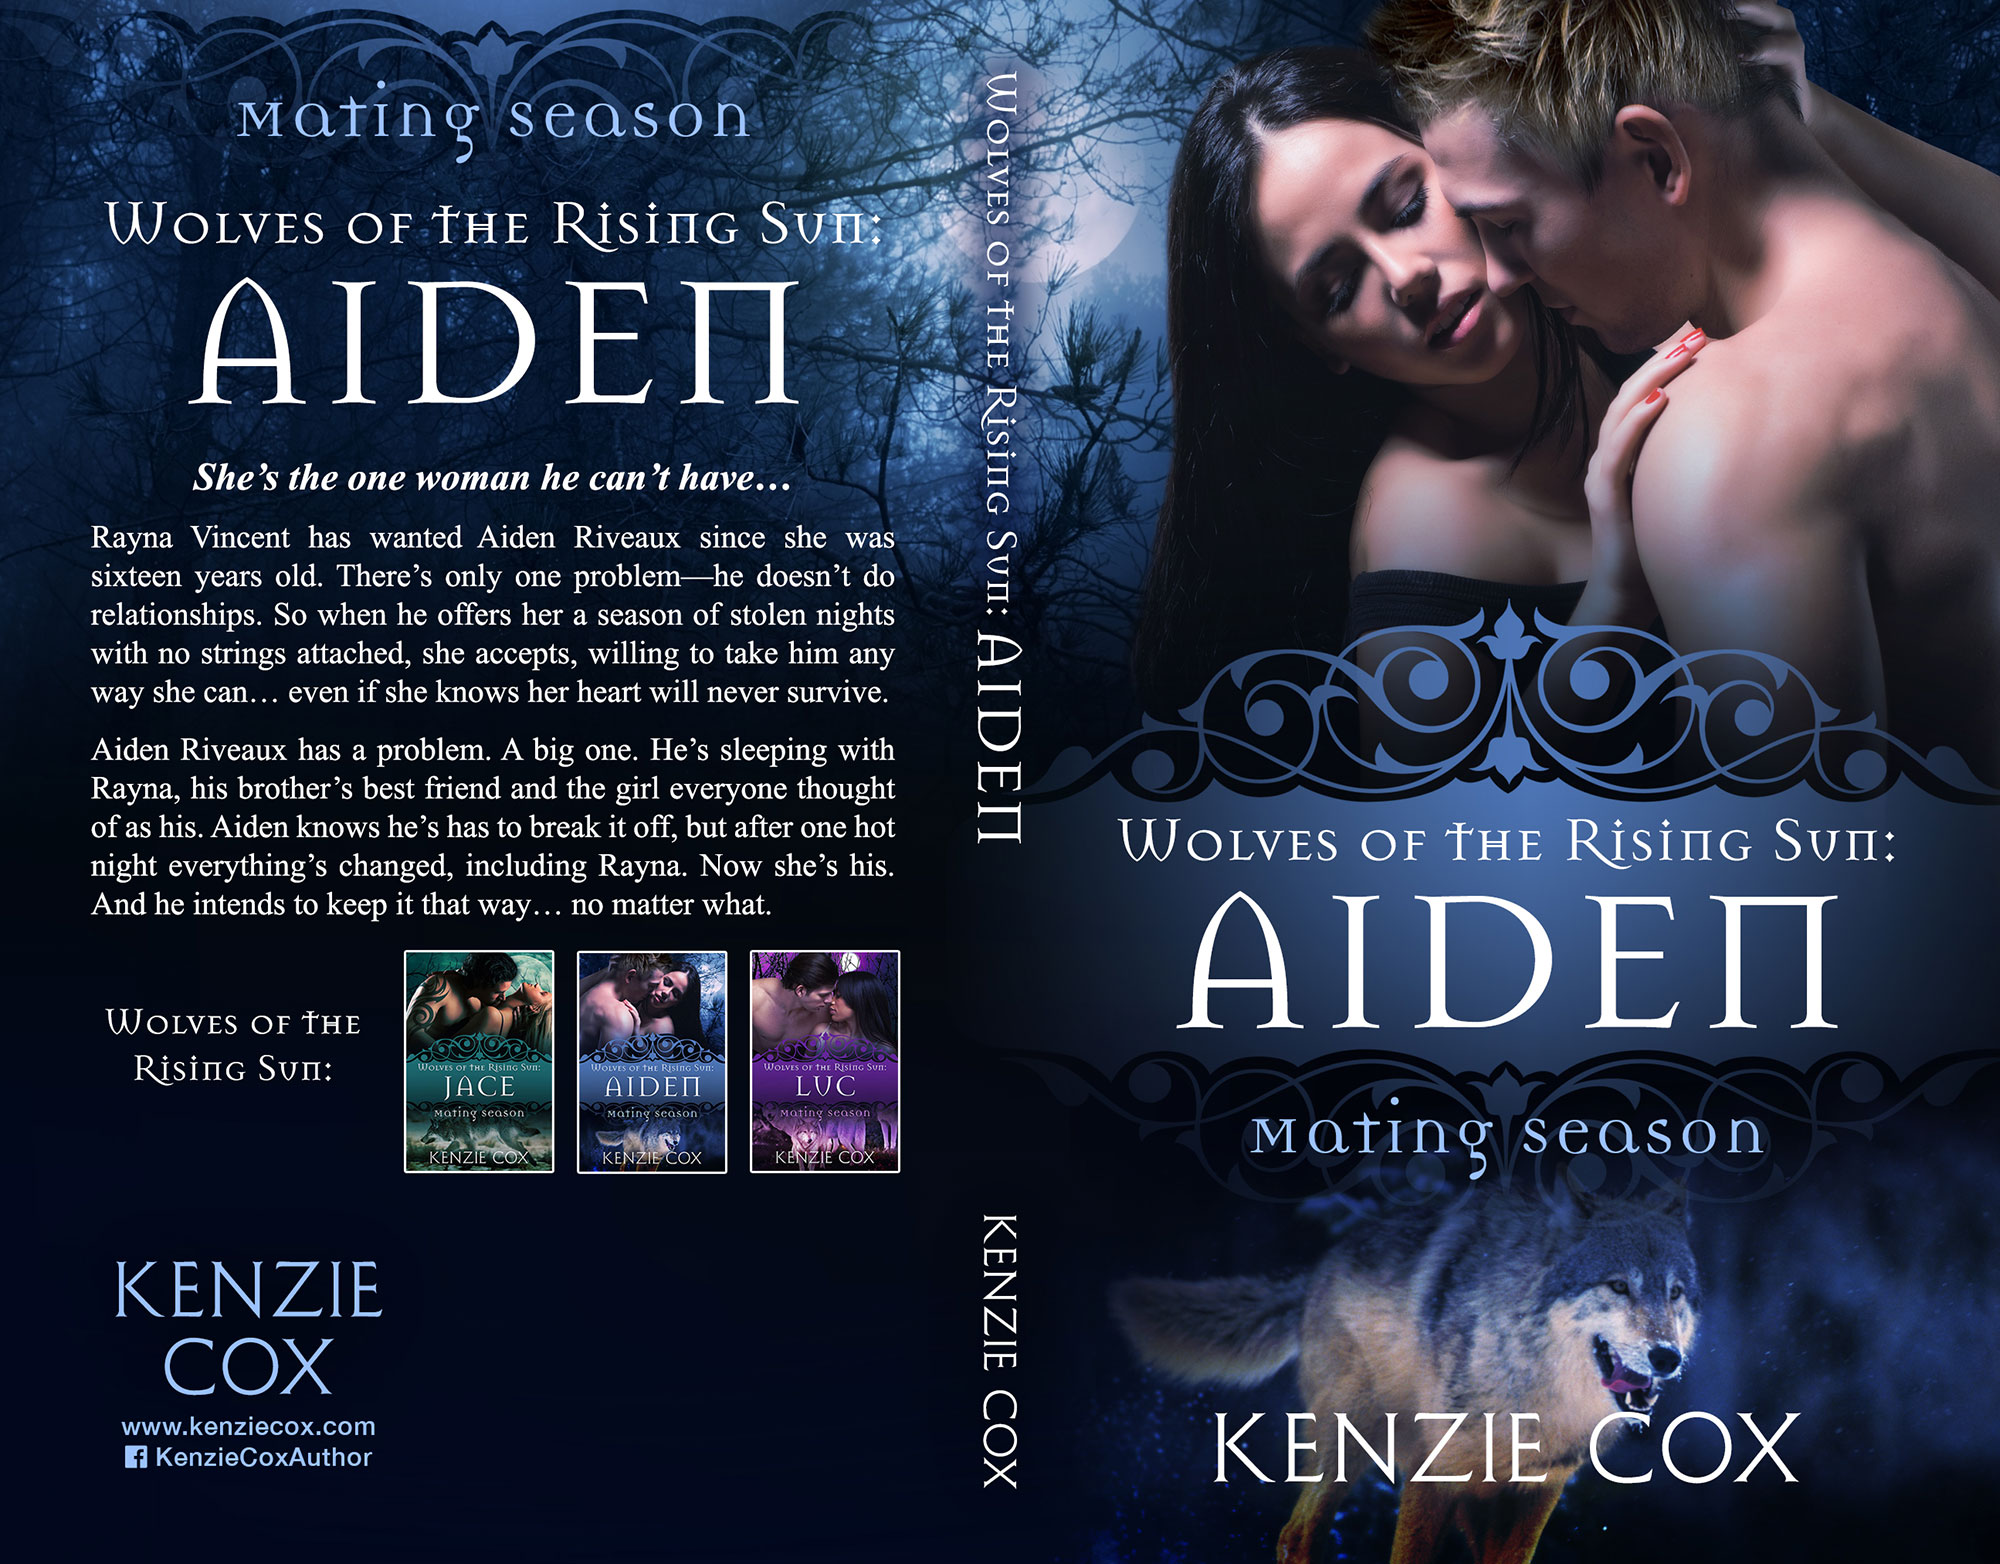 Mating Season: Aiden by Kenzie Cox (Print Coverflat)